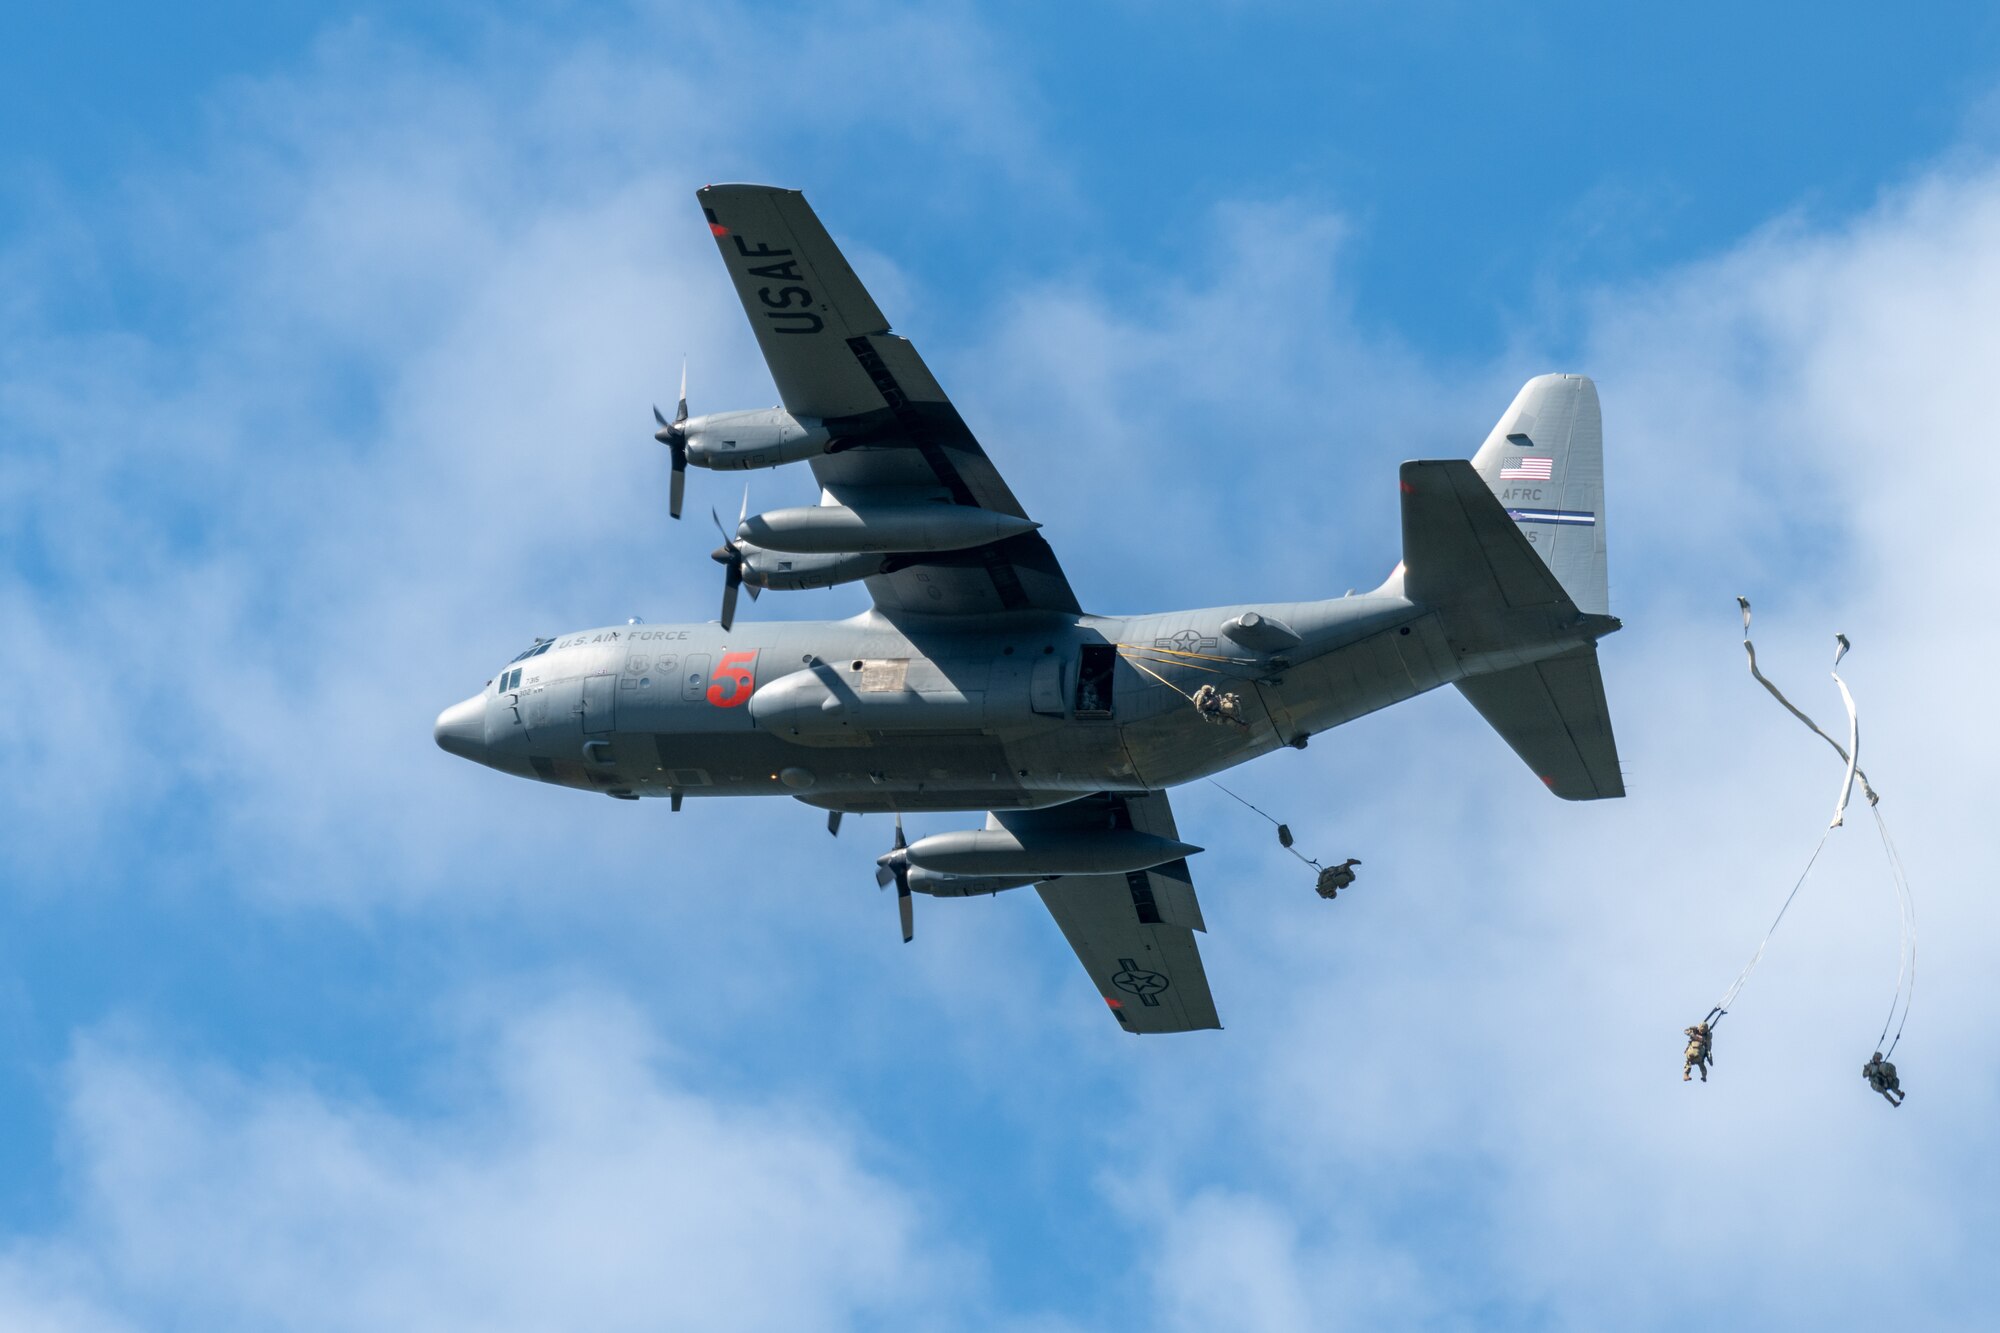 C-130 plane drops Army soldiers out of the back using parachutes.